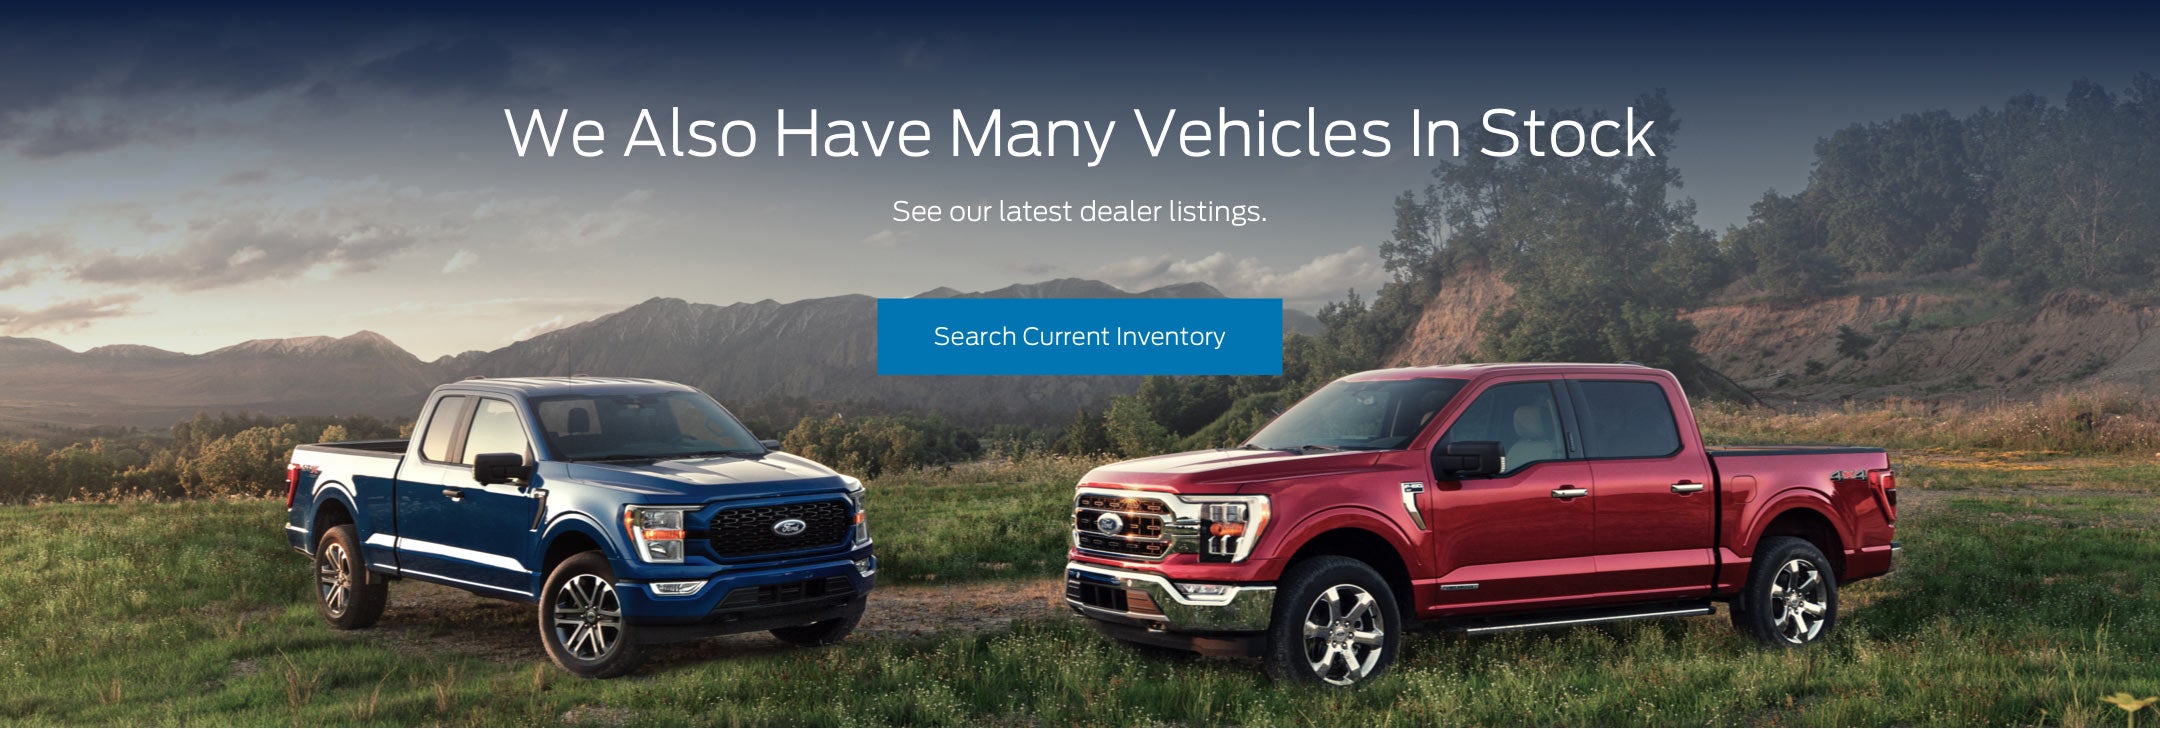 Ford vehicles in stock | Sarchione Ford of Waynesburg in Waynesburg OH